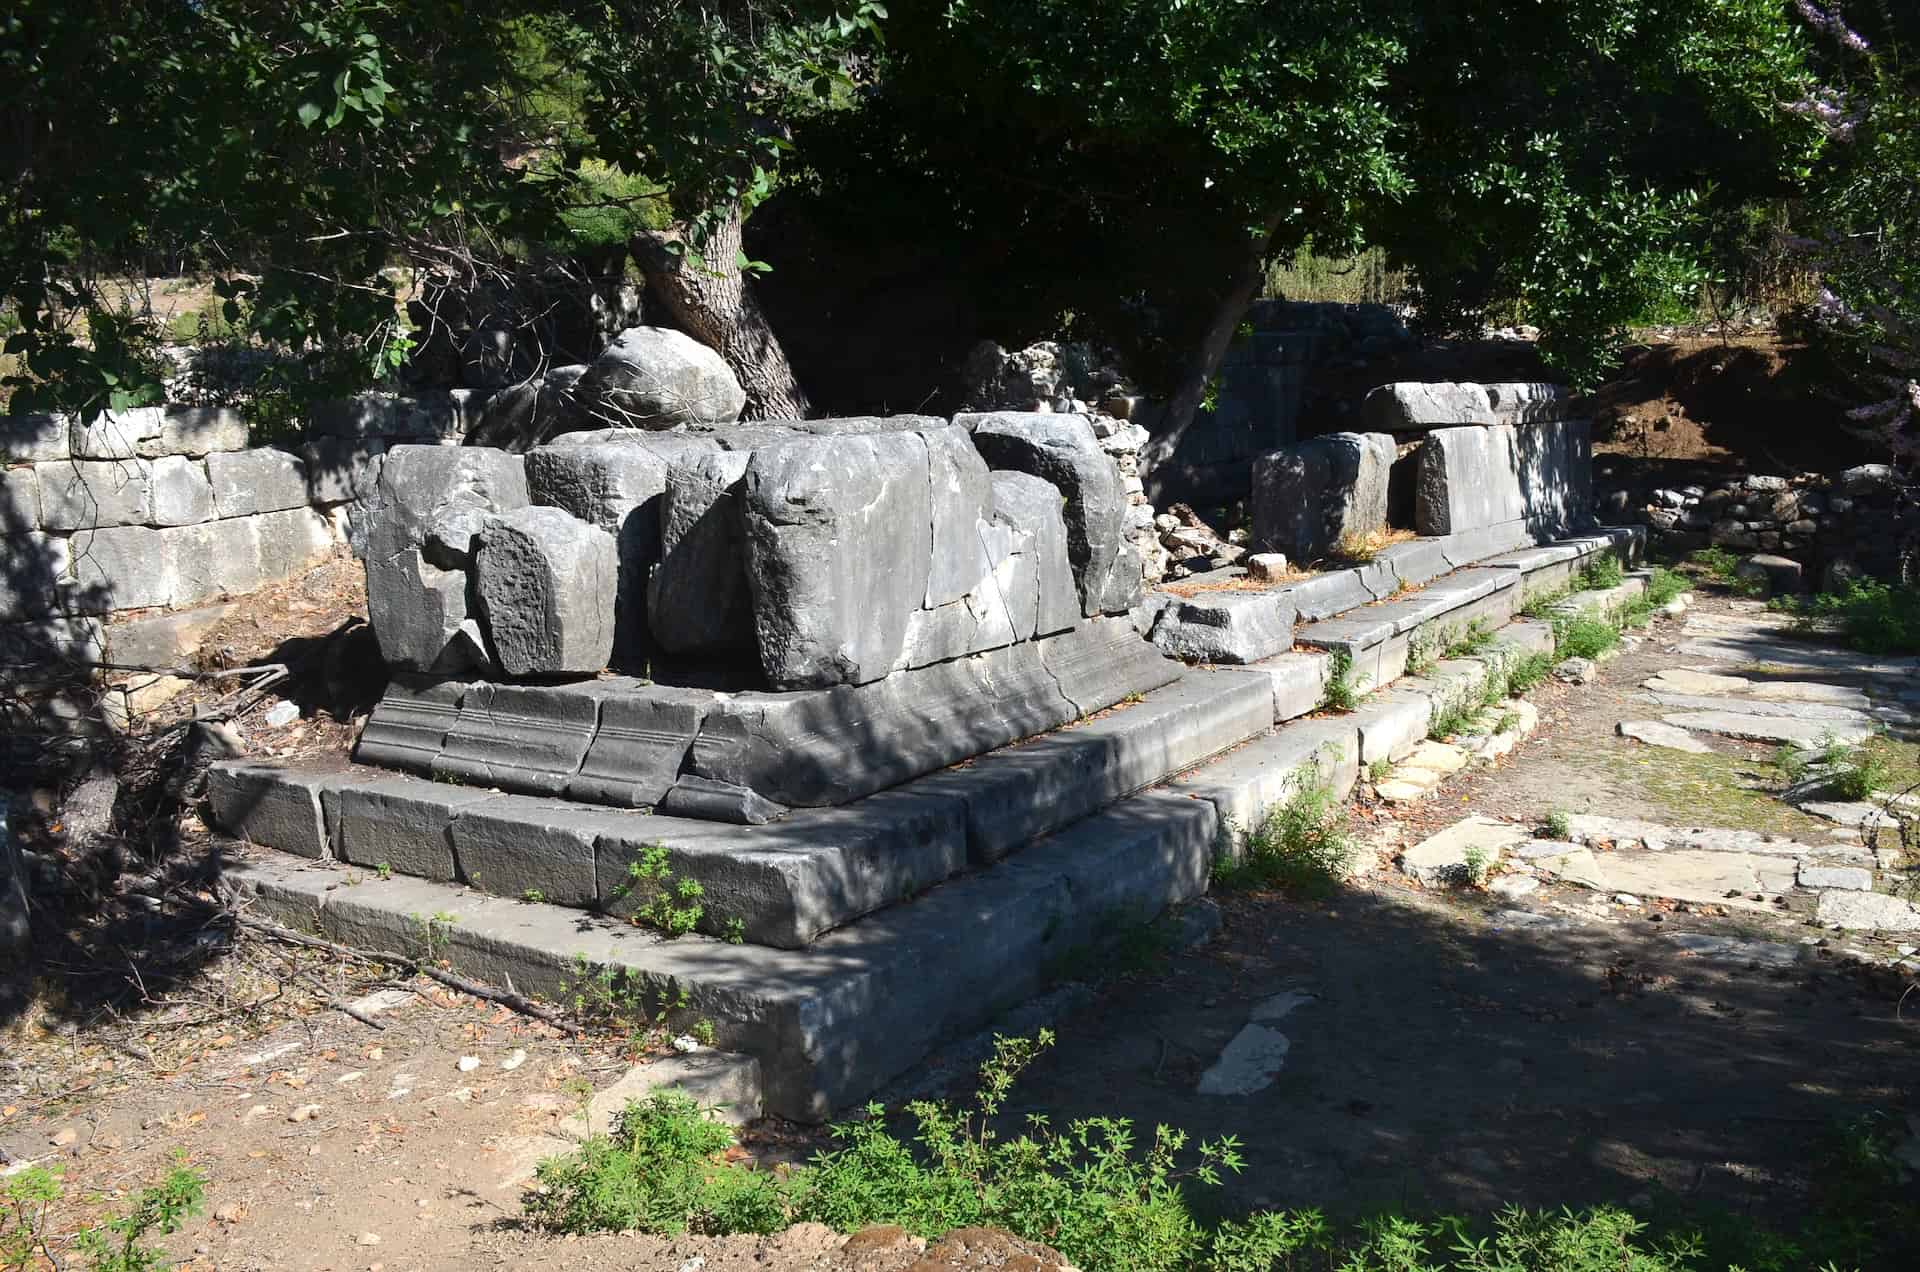 Monument of Glykinna (front) and Monument of Quintus Vedius Capito (rear) at Kaunos, Turkey